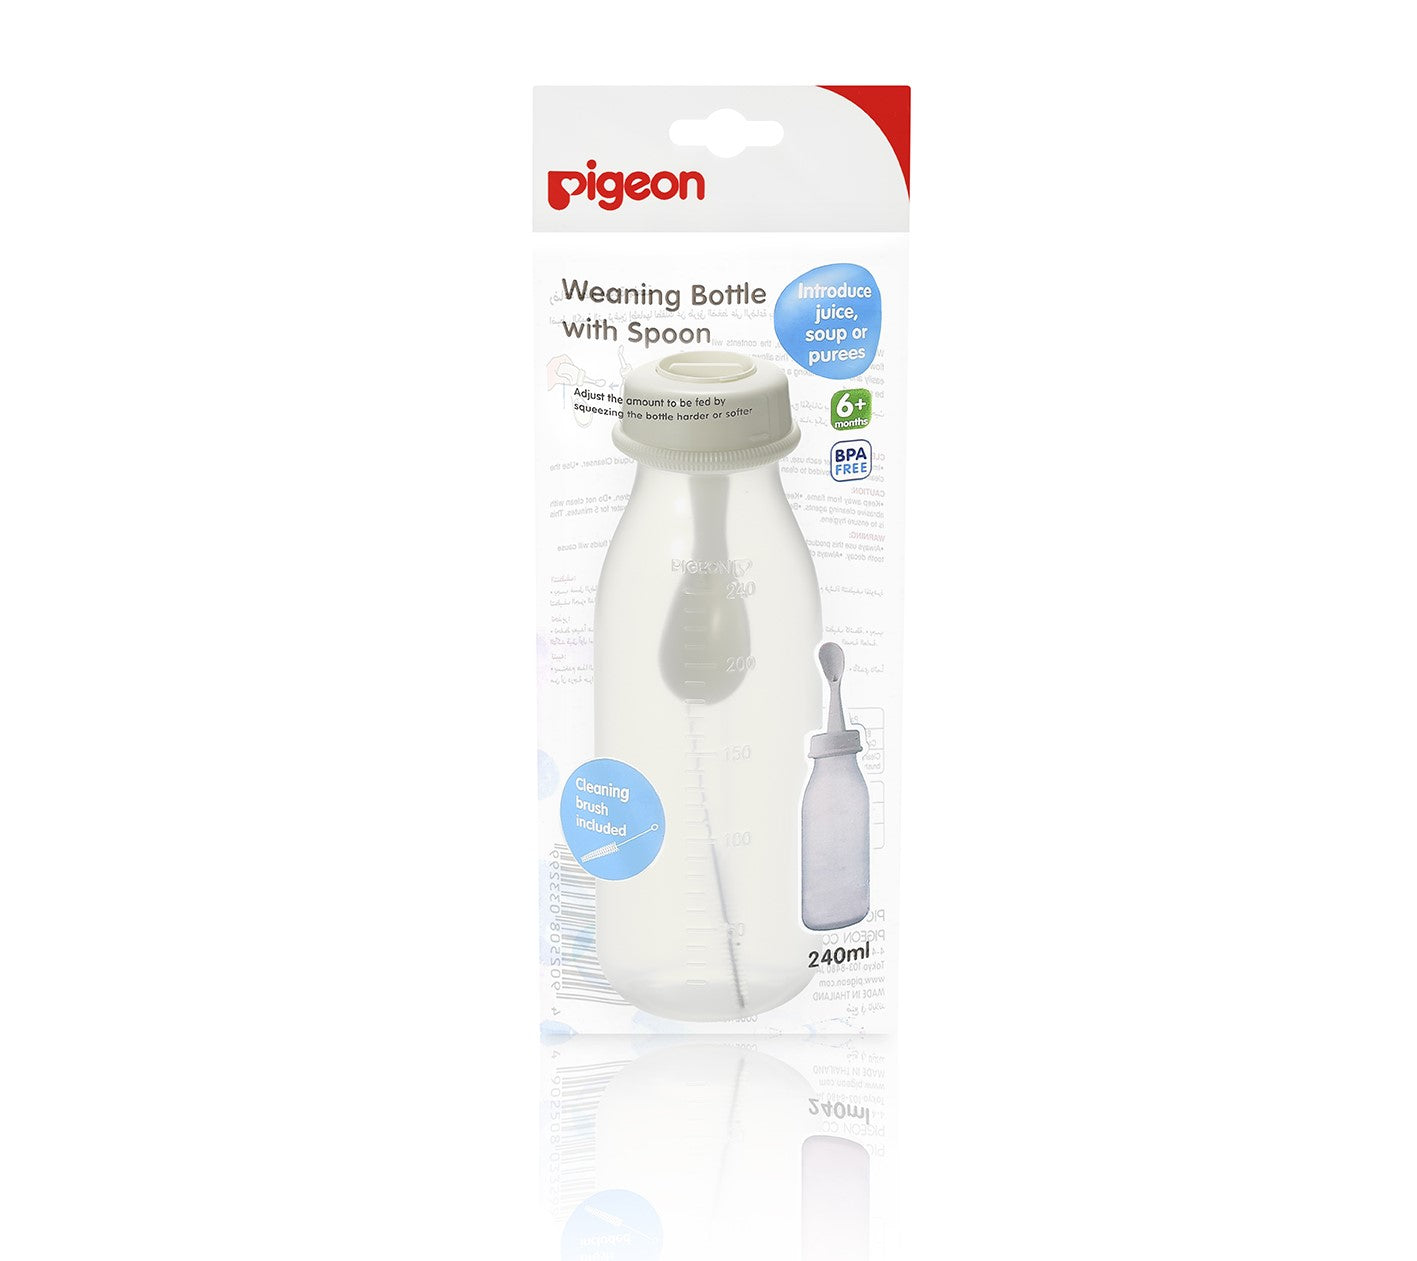 Pigeon Weaning Bottle With Spoon